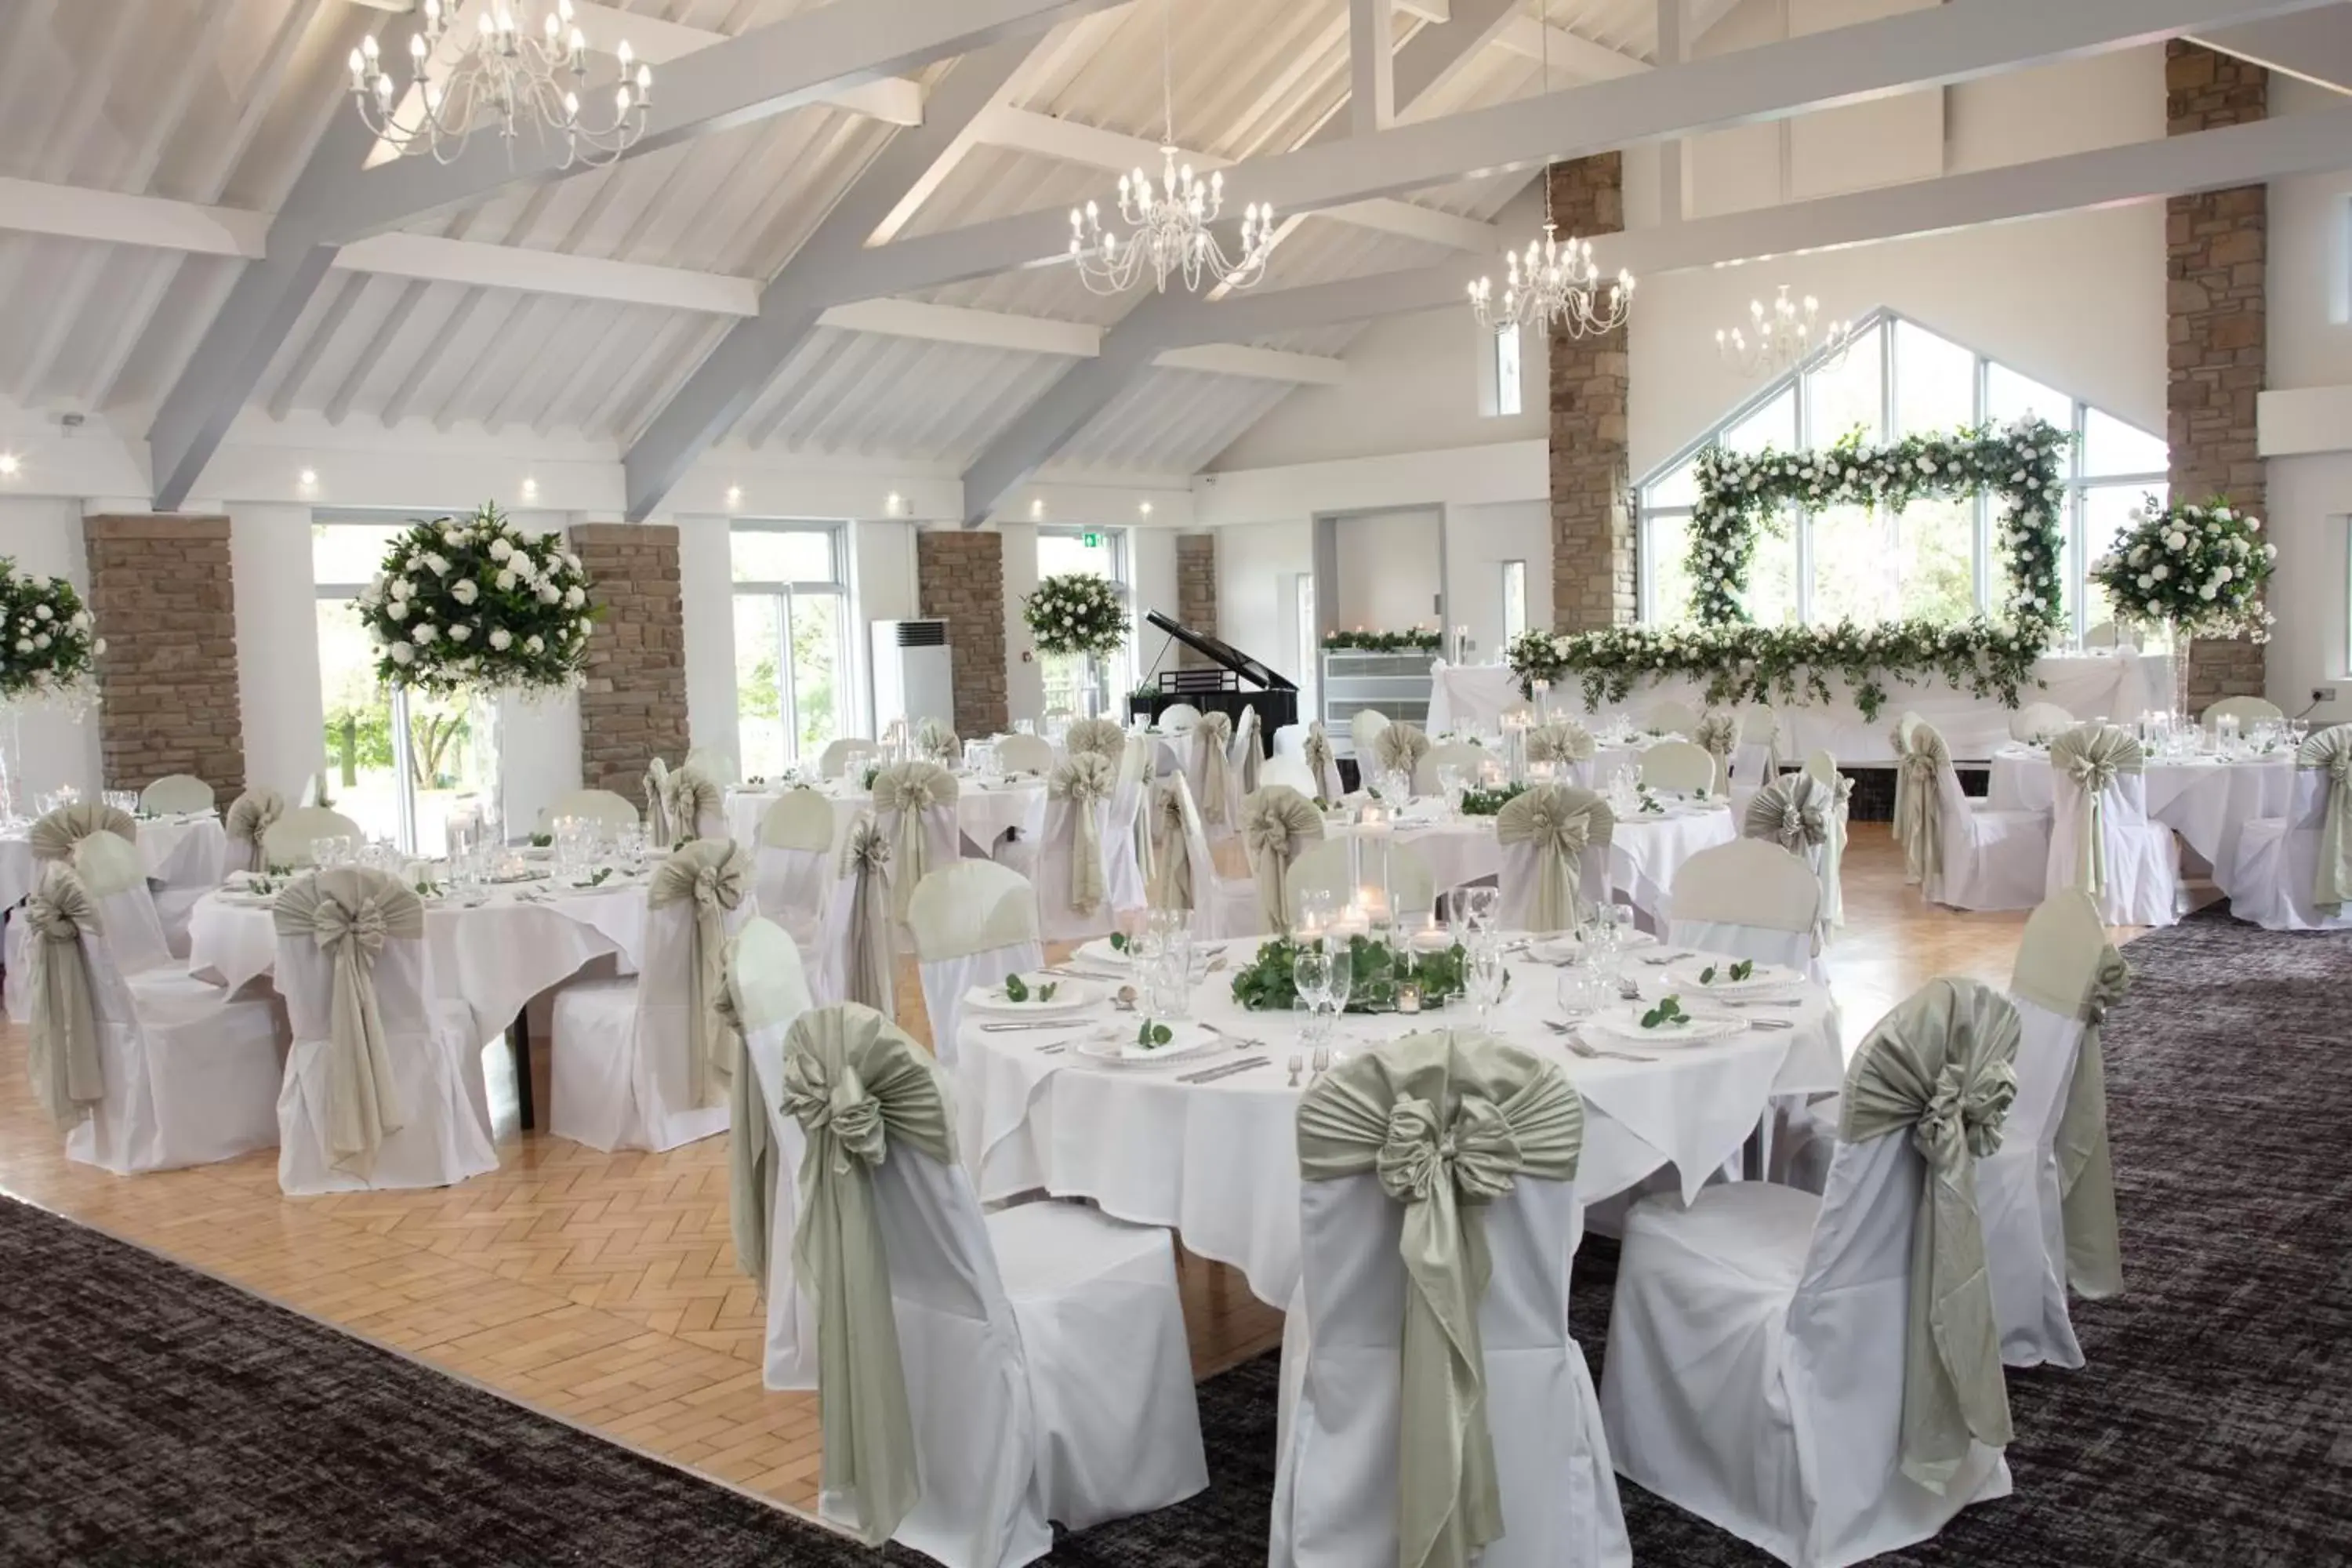 Banquet/Function facilities, Banquet Facilities in Mytton Fold Hotel, Ribble Valley